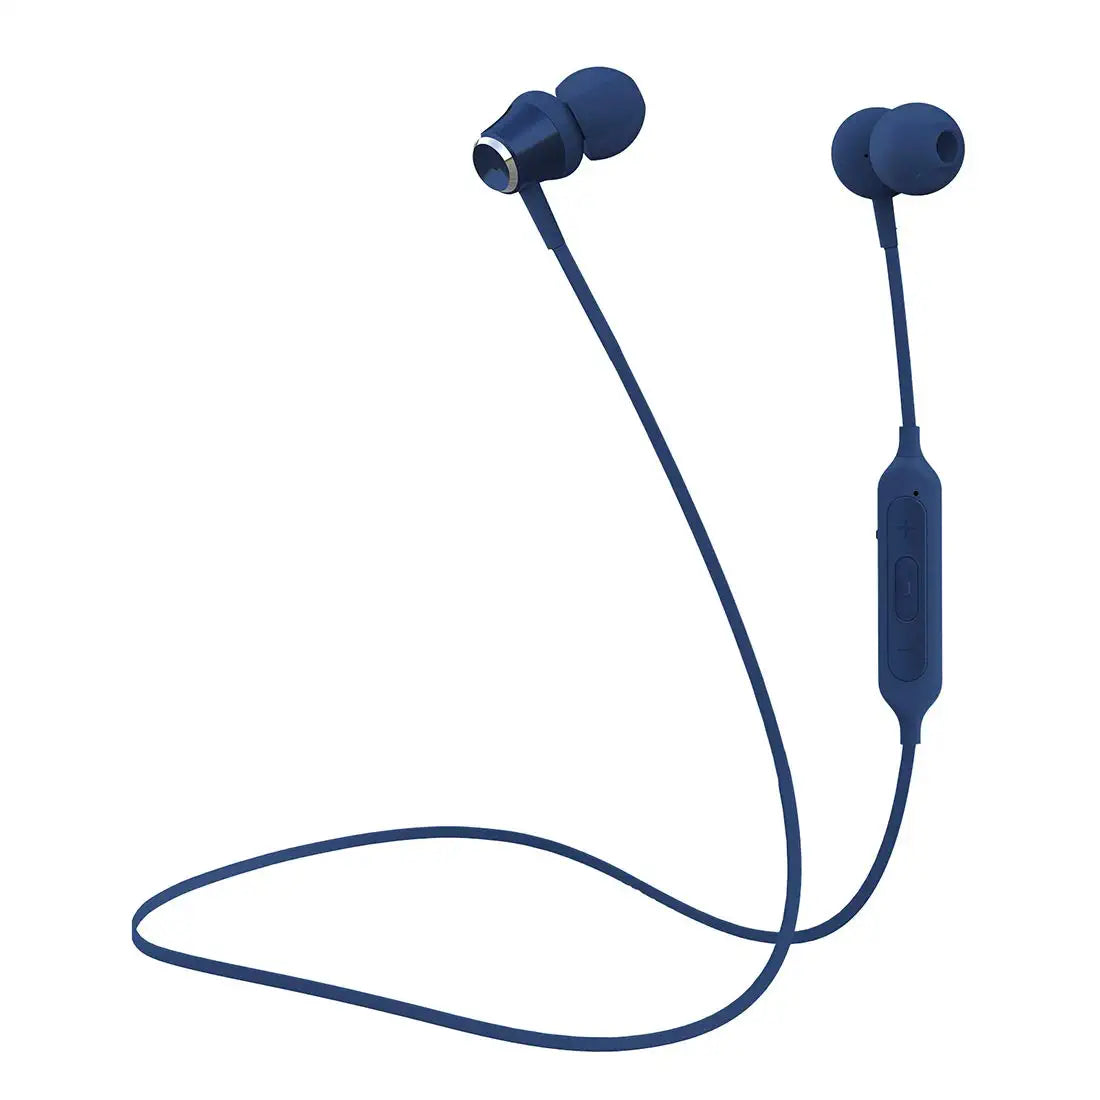 Celly BHSTEREO Magnetic in-Ear Bluetooth 5.0Wireless, Ergonomic Design,Tangle-Free Cord with Mic (Blue) (INDBHSTEREO2BL)